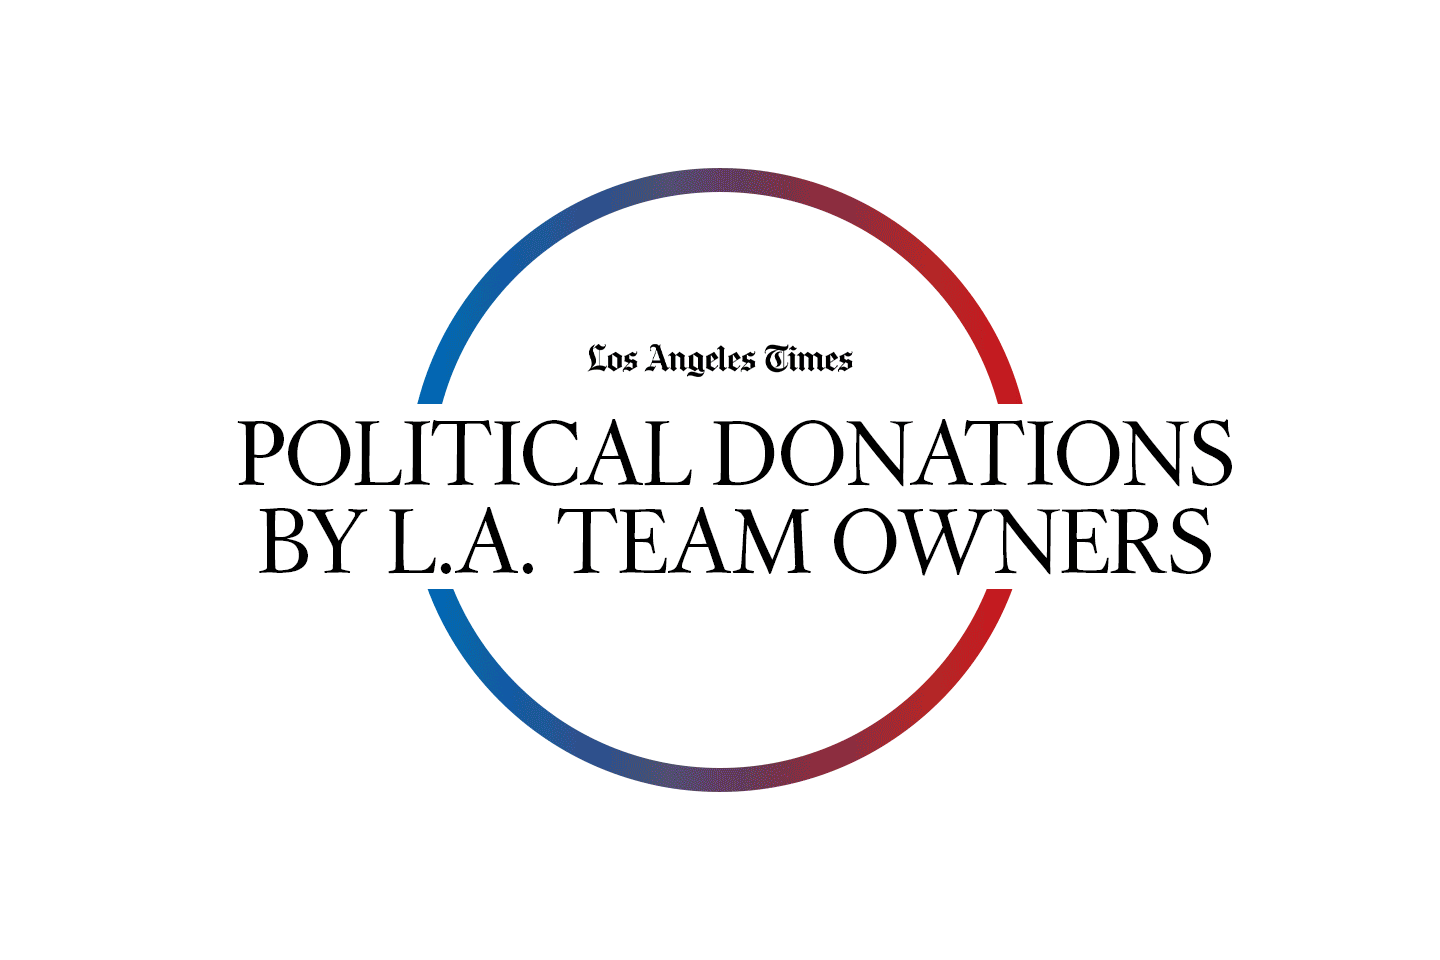 A look at the political donations made by Los Angeles professional sports team owners.